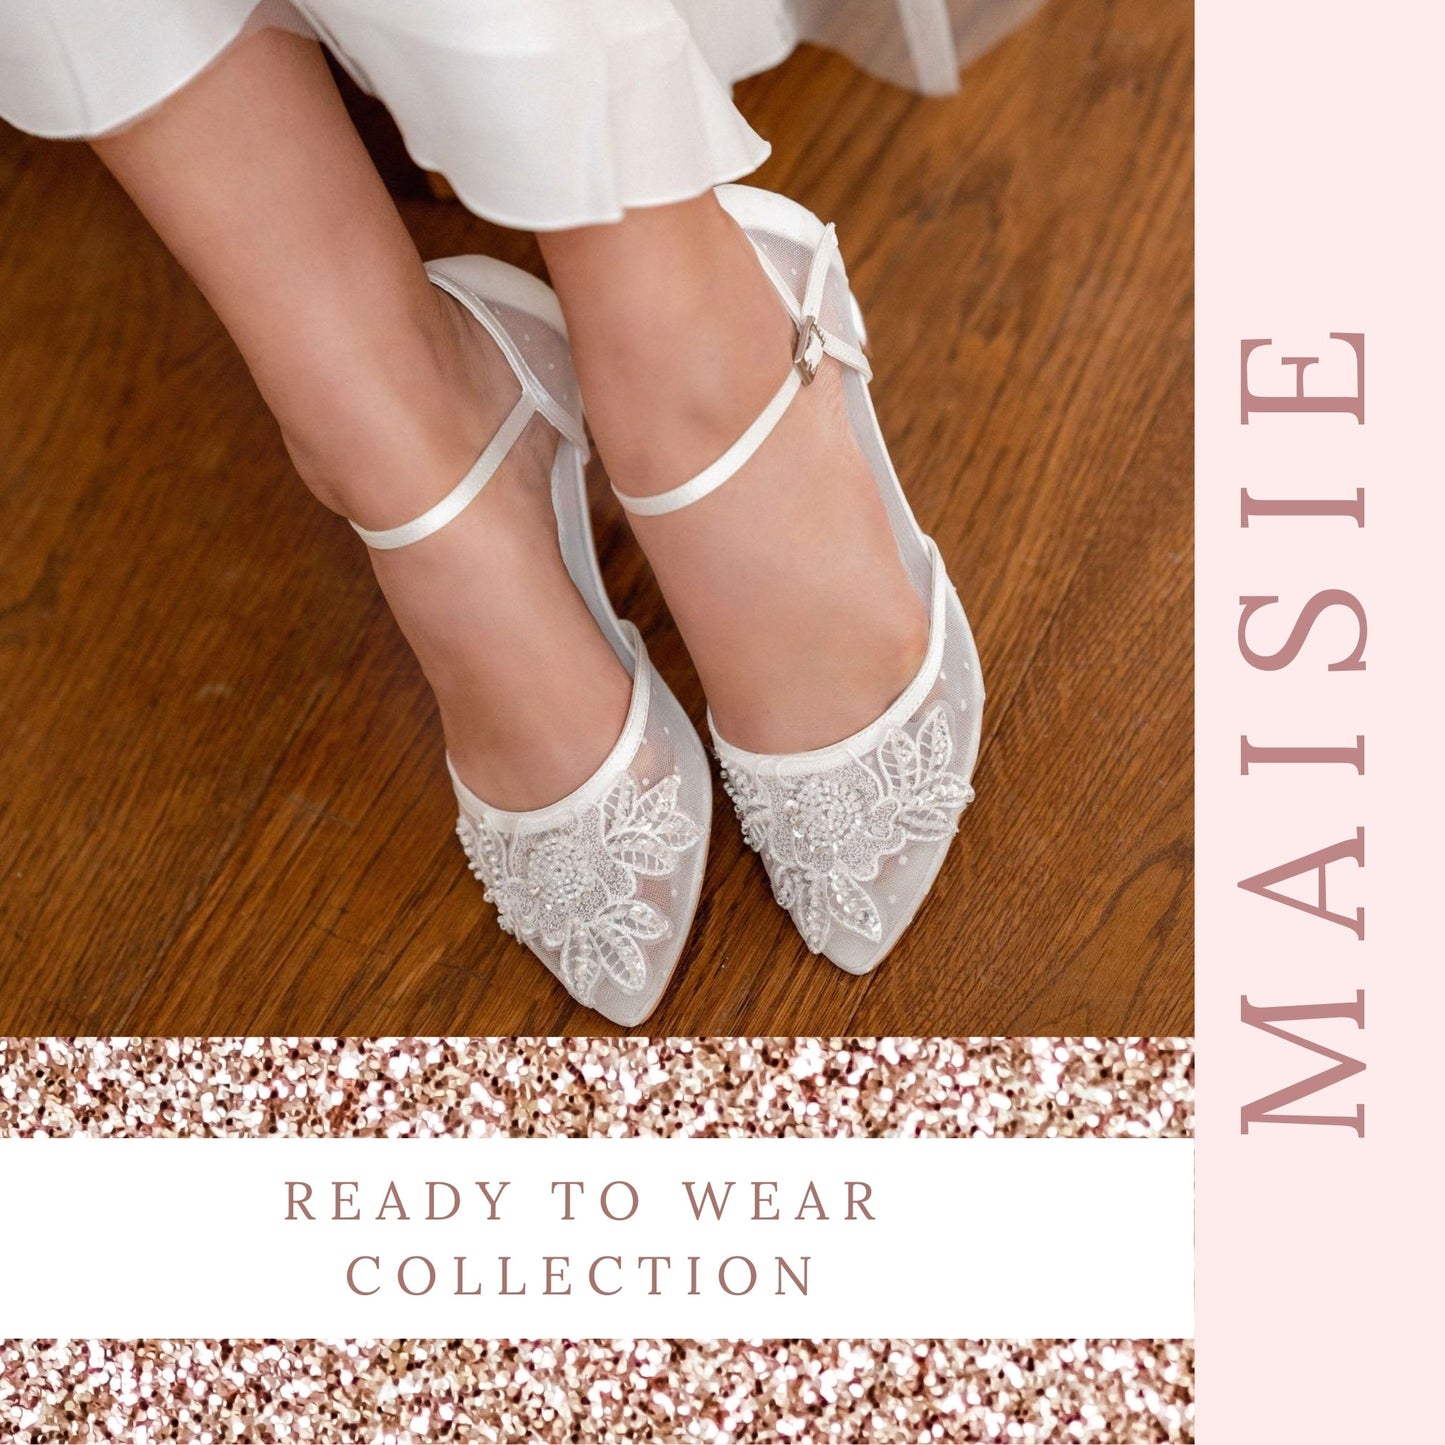 Short Heel Shoes For Wedding | Bridal Shoes Closed Toe Low Heel